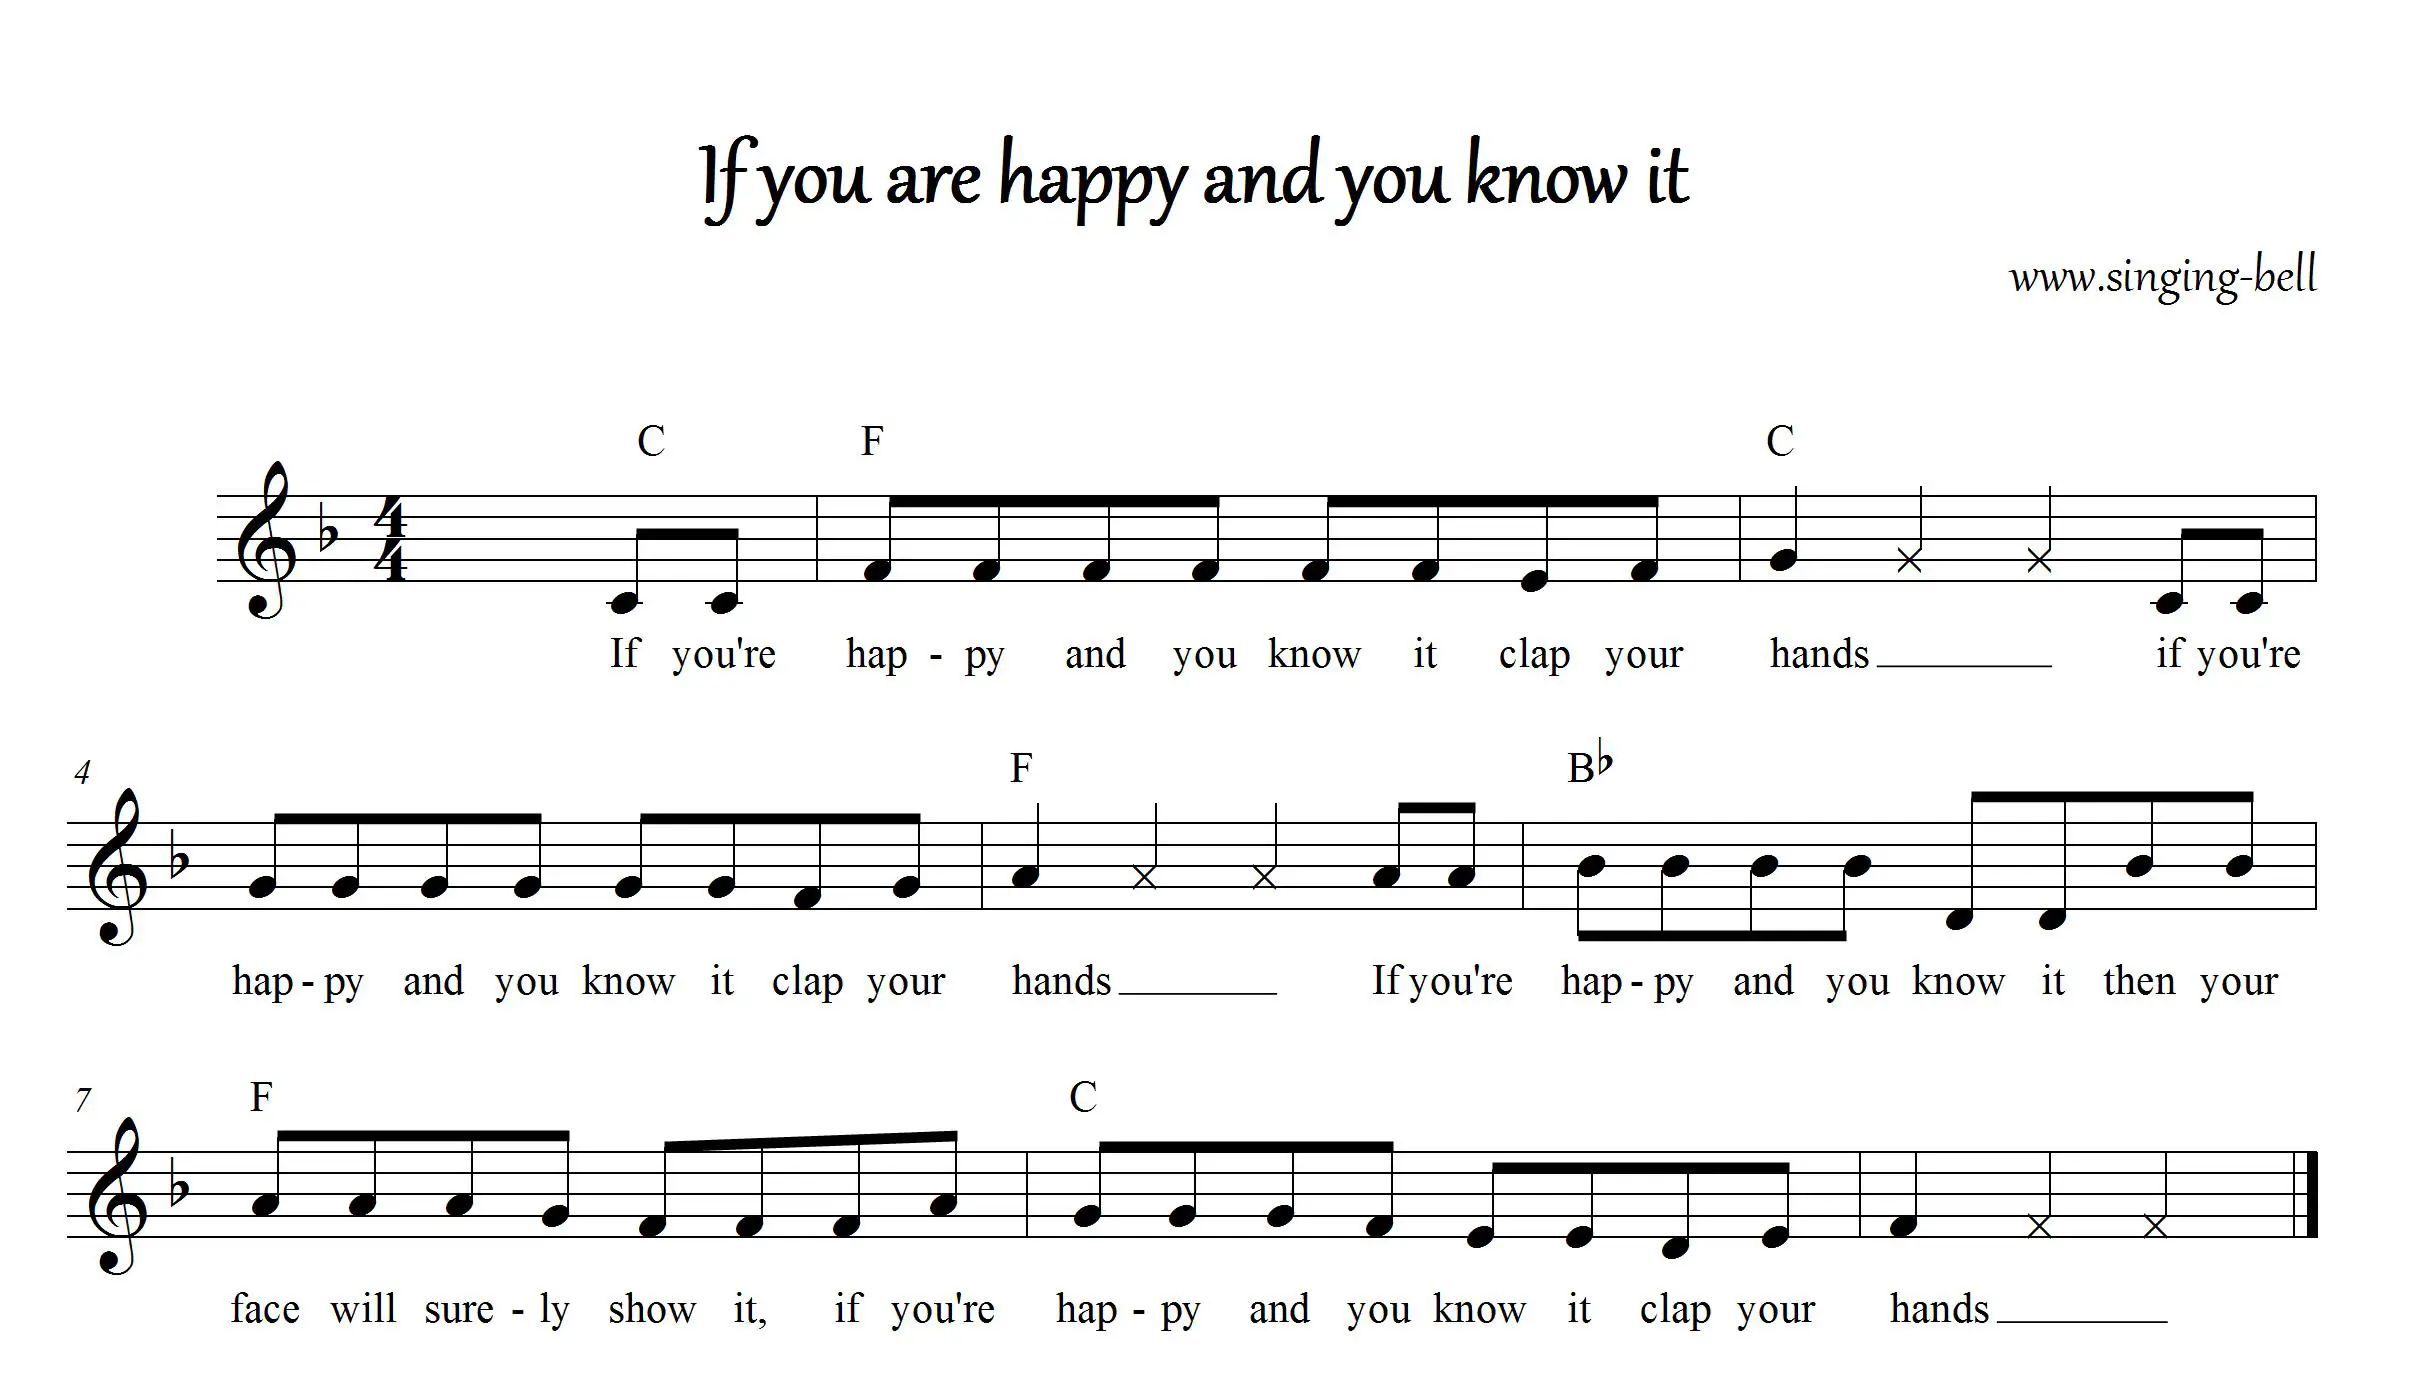 If you are happy and you know it_F_singing-bell